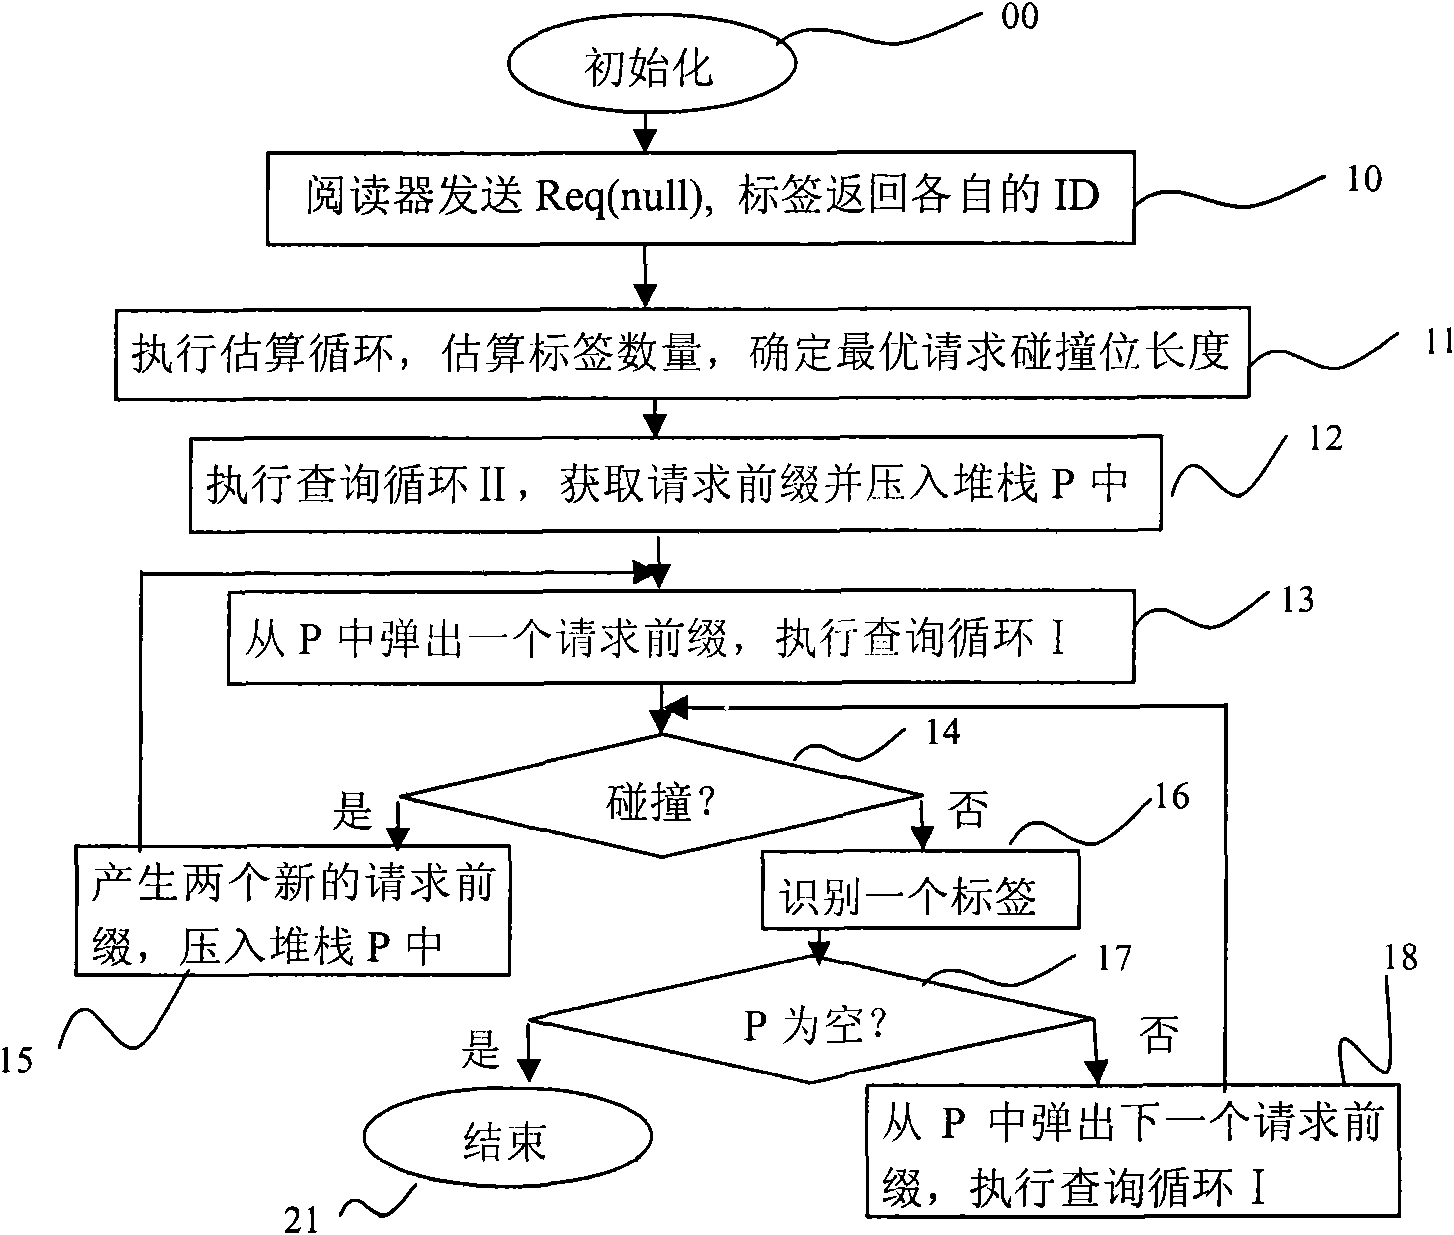 Binary search anti-collision method with unknown label quantity estimation function